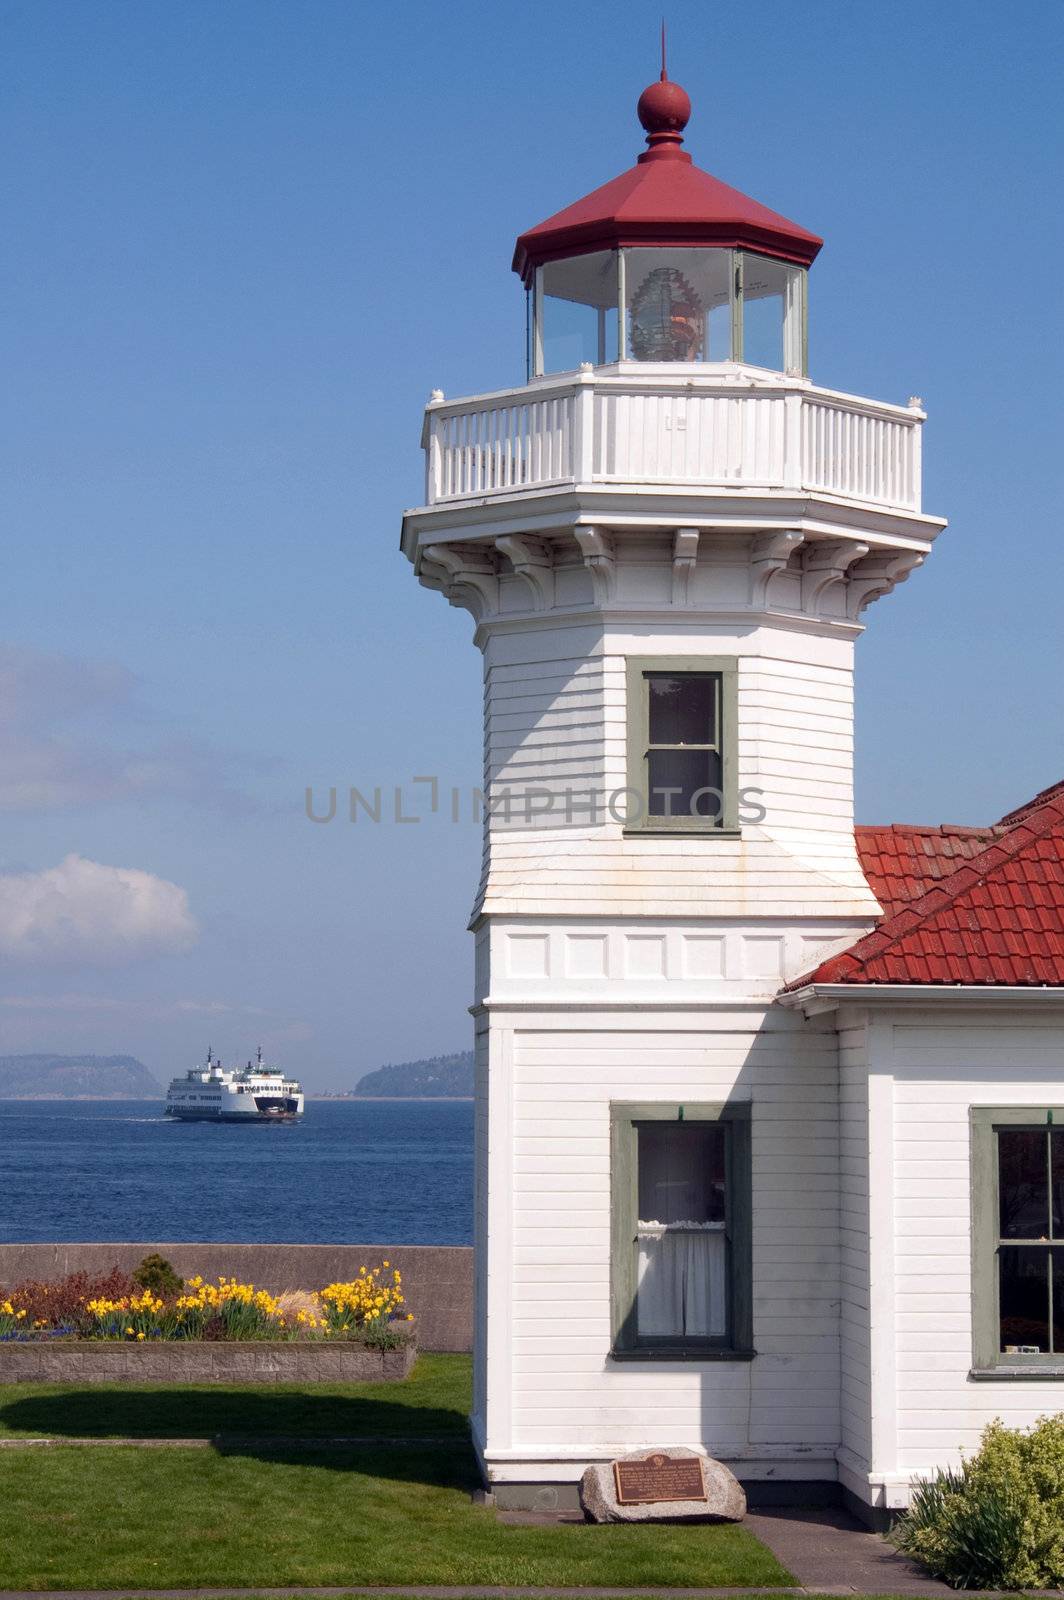 A ferry crosses the Puget Sound behind the Lighthouse